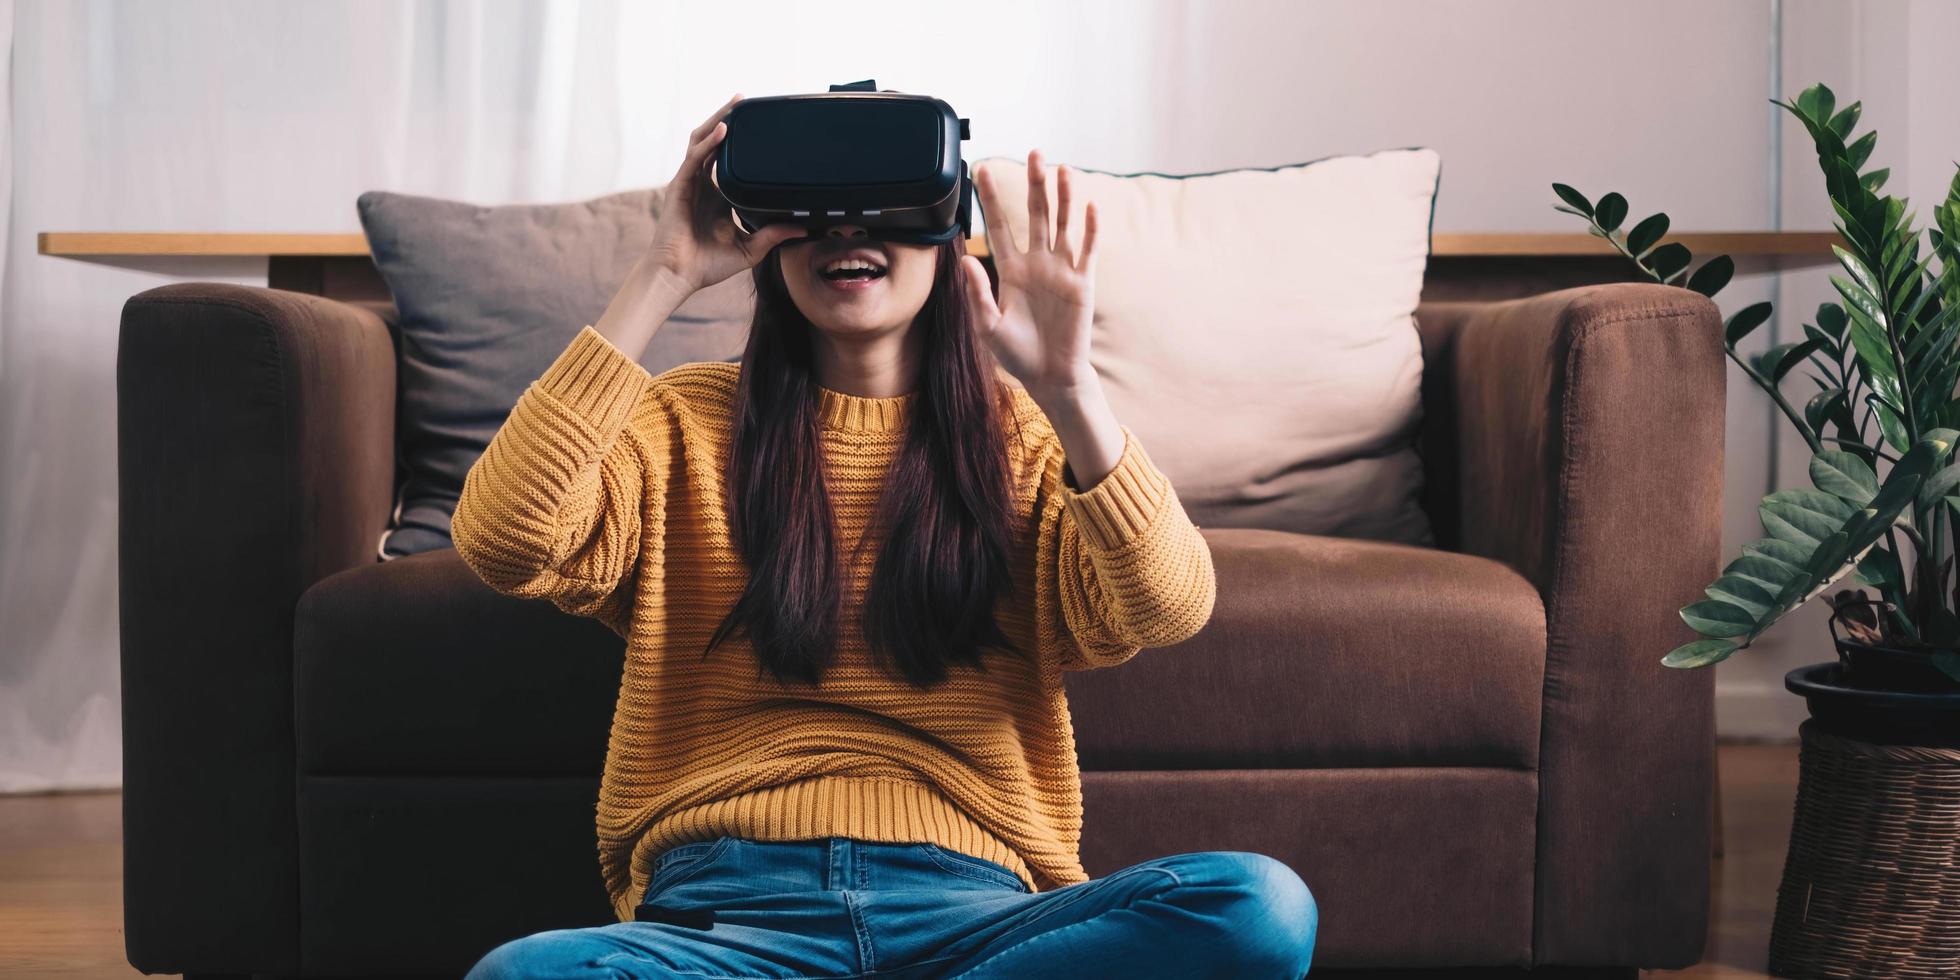 Asian woman play VR game for entertain at home, asian woman joyful in house on holiday. Happy woman playing metaverse VR technology concept. photo